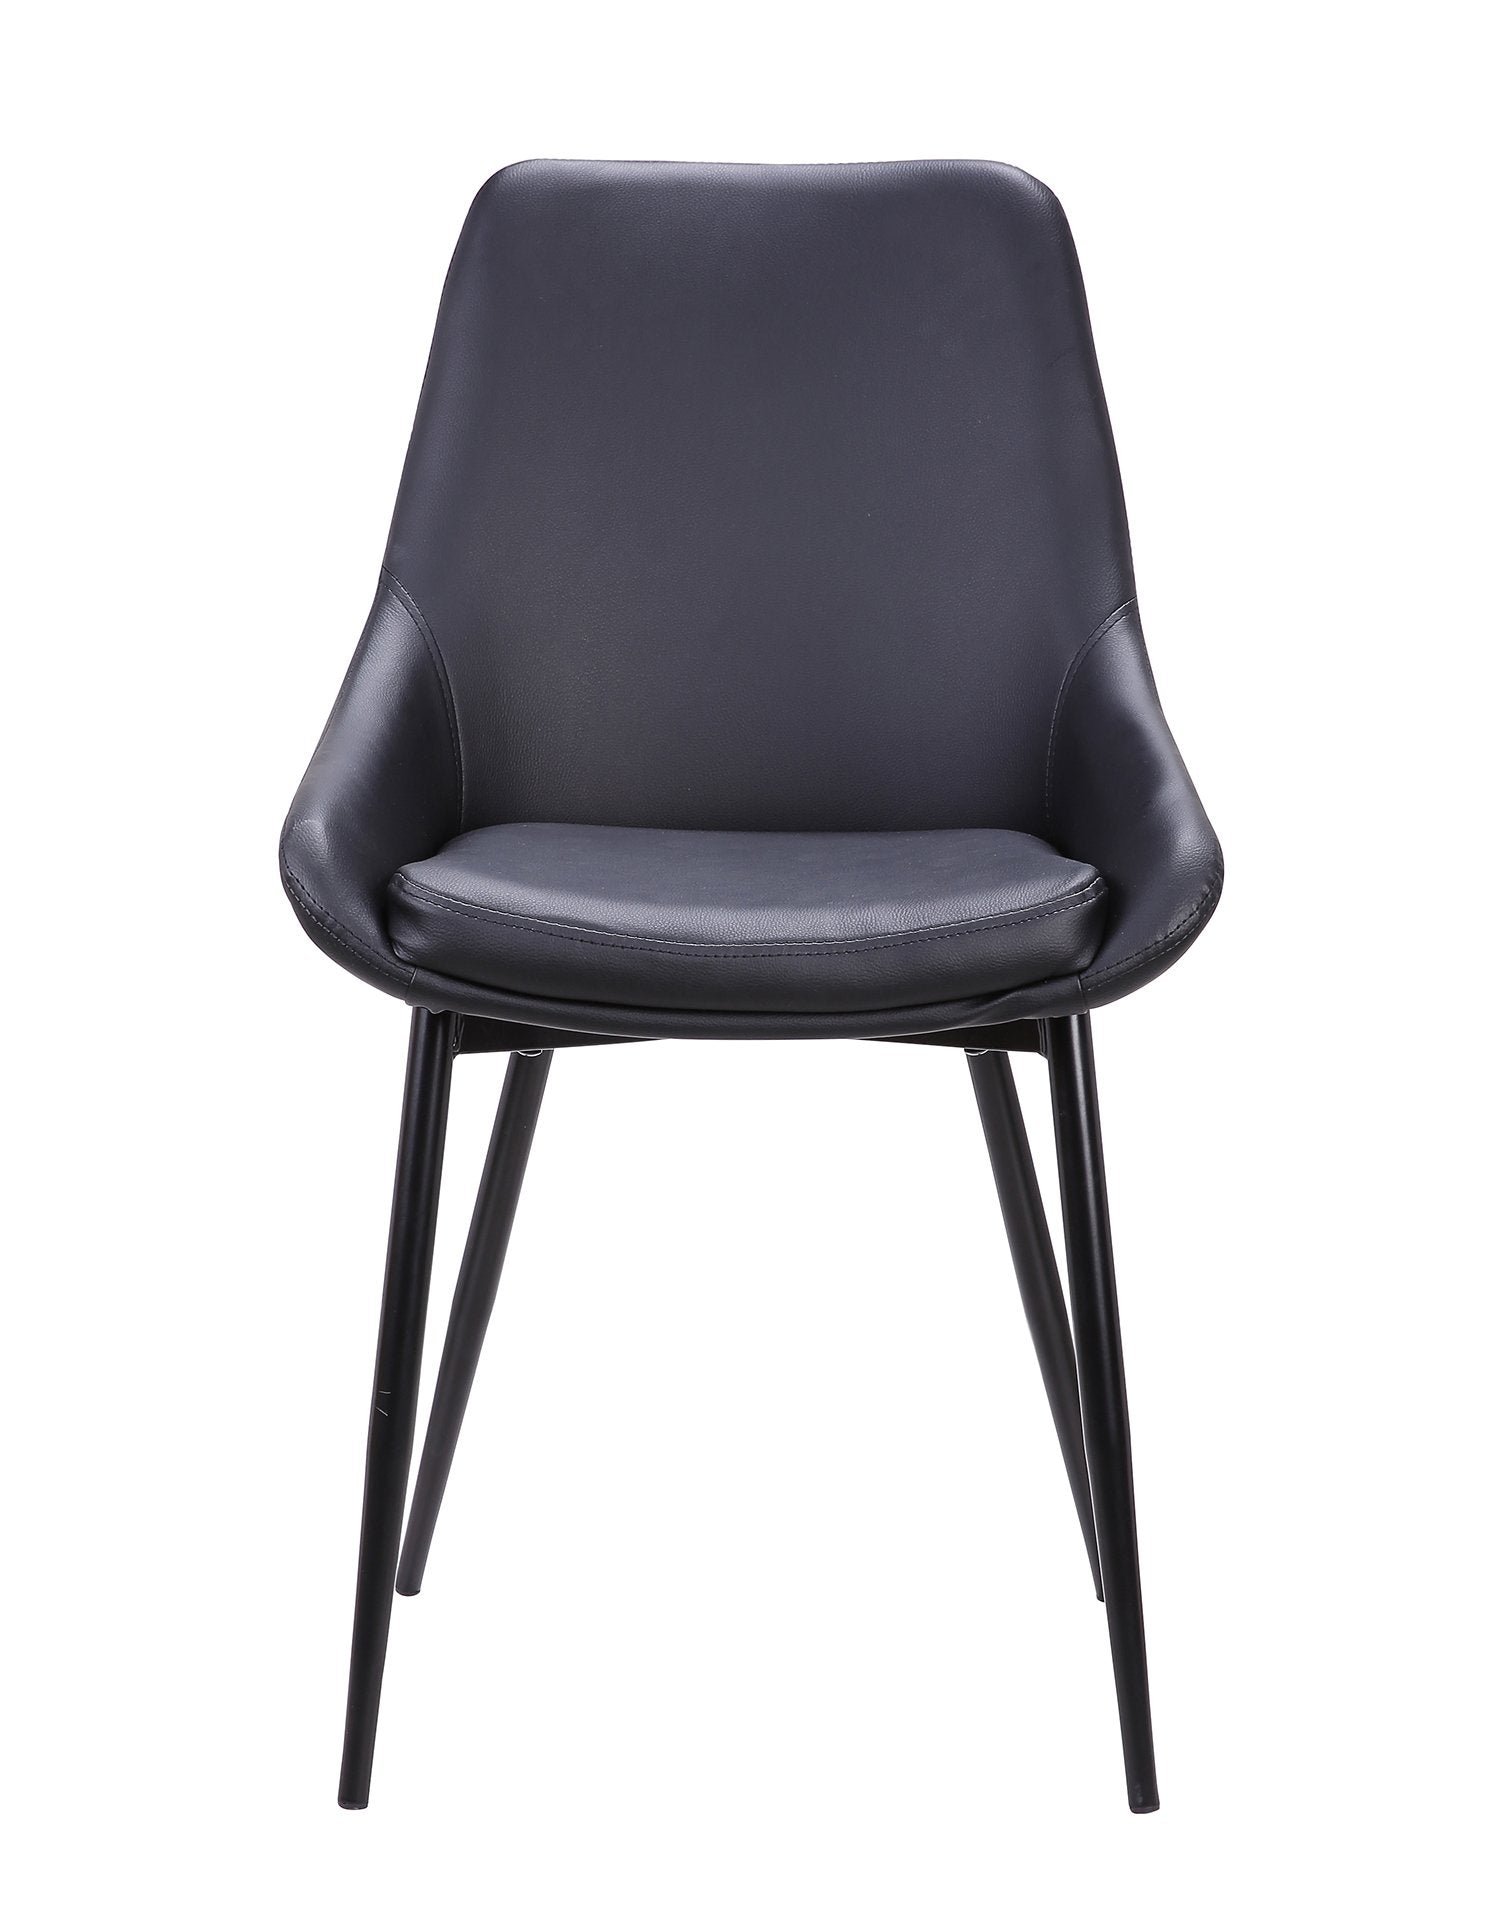 Set of 2 Millie Dining Chair - Black - Dining Chairs